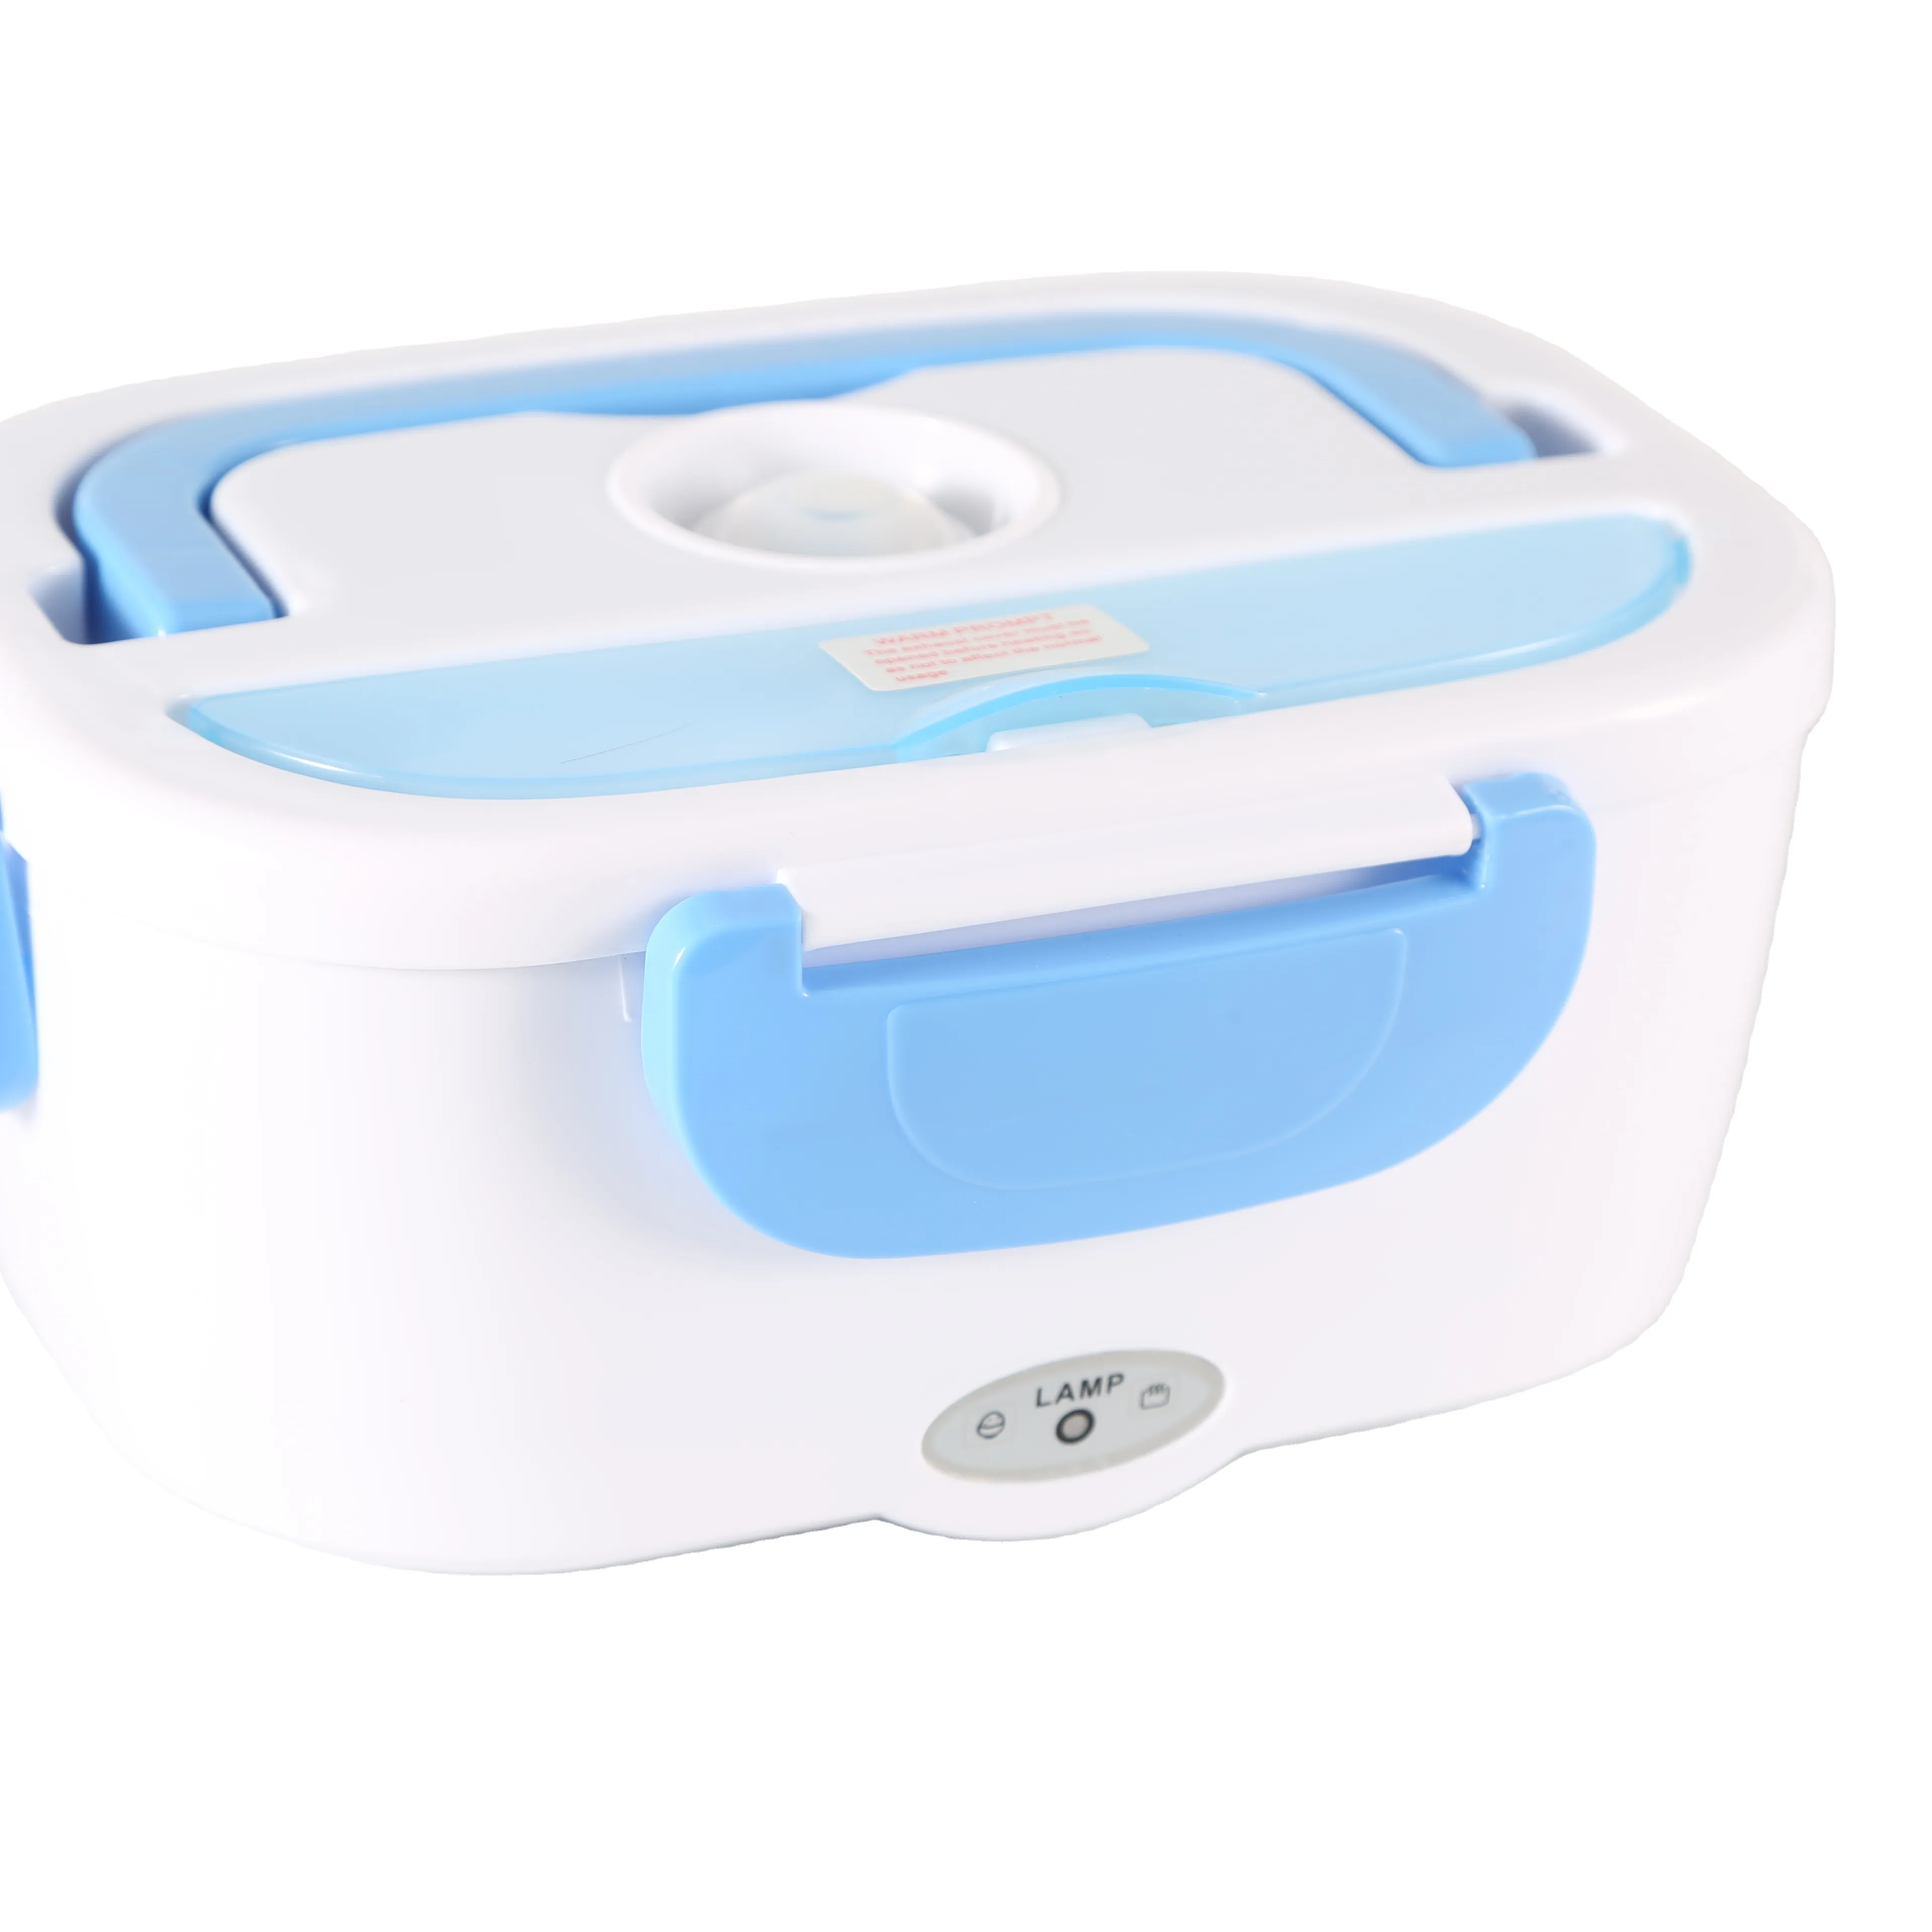 Multifunctional Portable Food Warmer Self Heated Cooking Electric Box Lunch